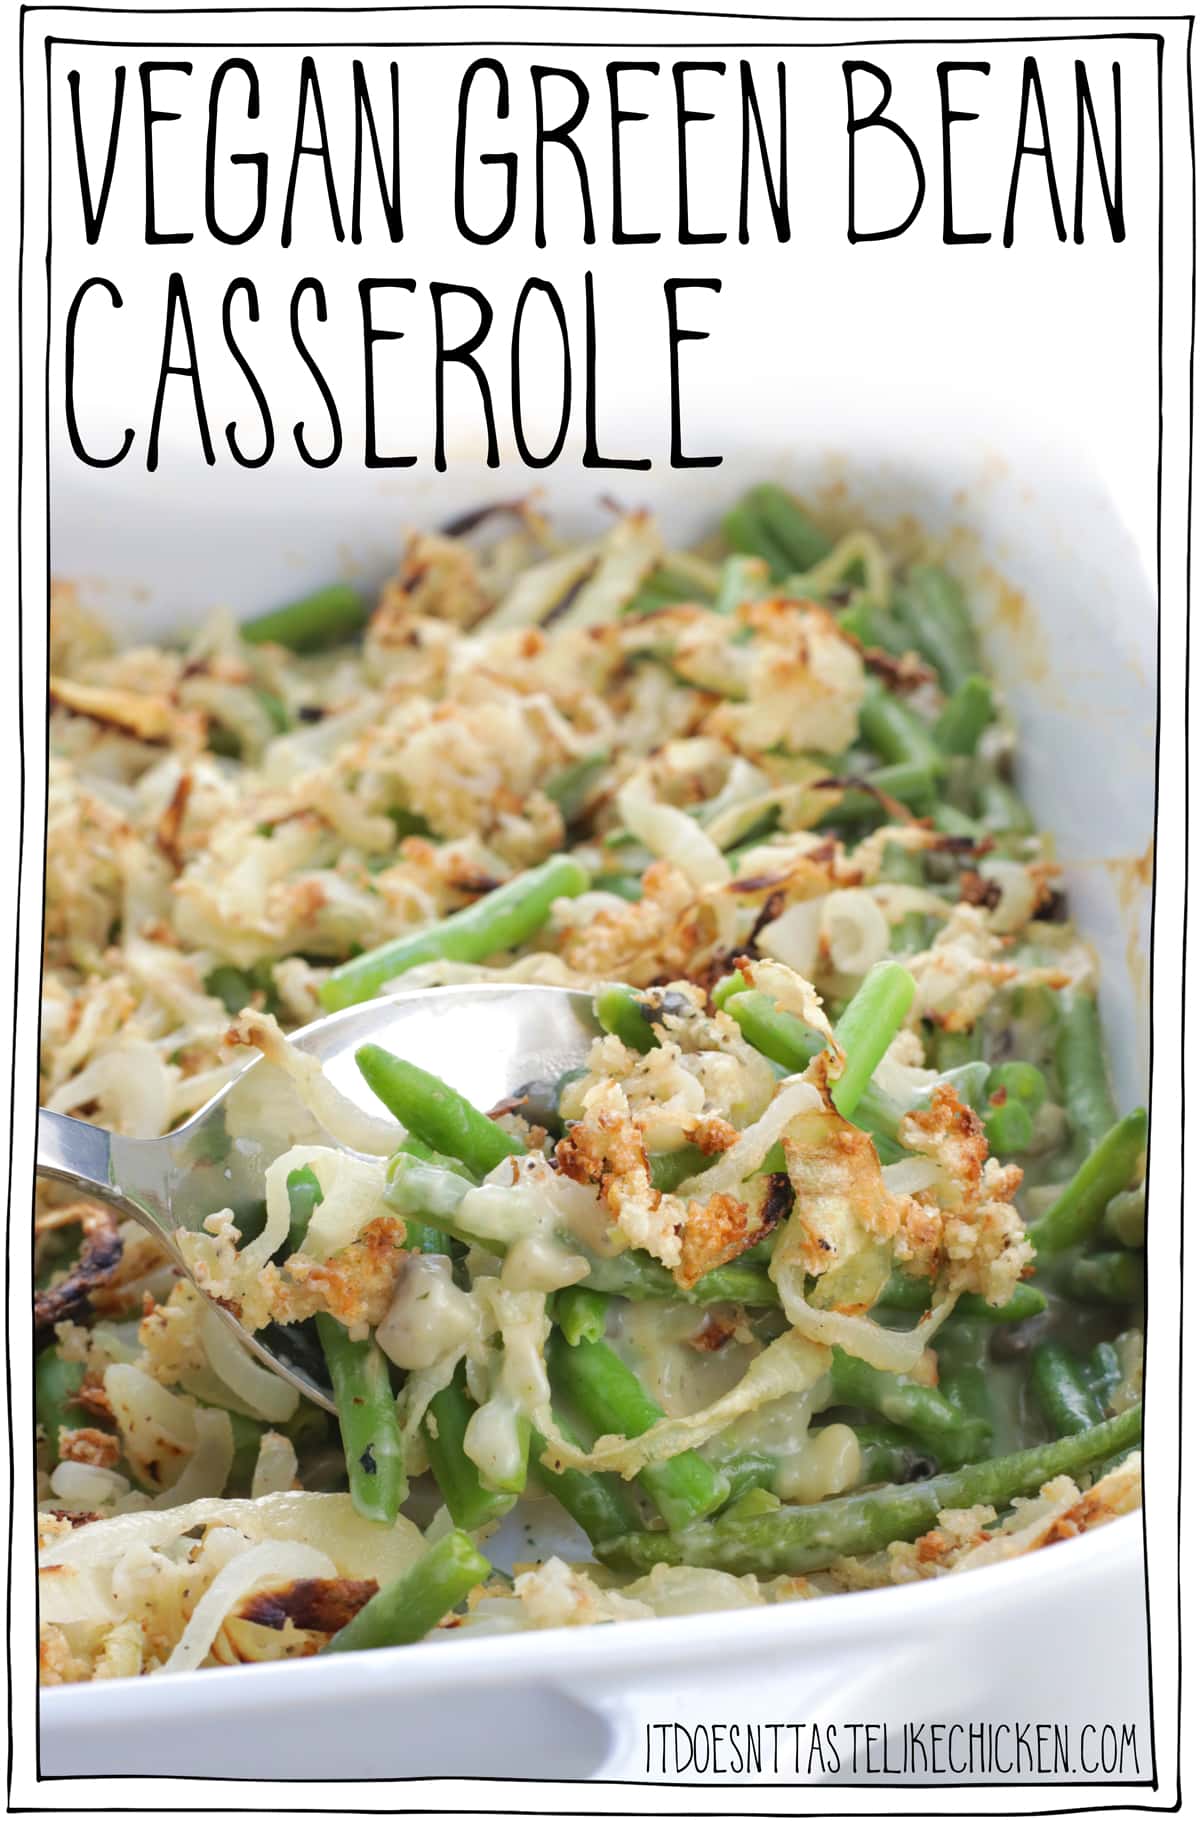 Vegan Green Bean Casserole! Easy to make, can be prepared ahead of time and then baked fresh, it's way healthier than the traditional version, (it can even be made gluten-free and oil-free if you wish!) and of course it's the absolute BEST side dish for your holiday or Thanksgiving feast! #itdoesnttastelikechicken #veganrecipes #veganthanksgiving